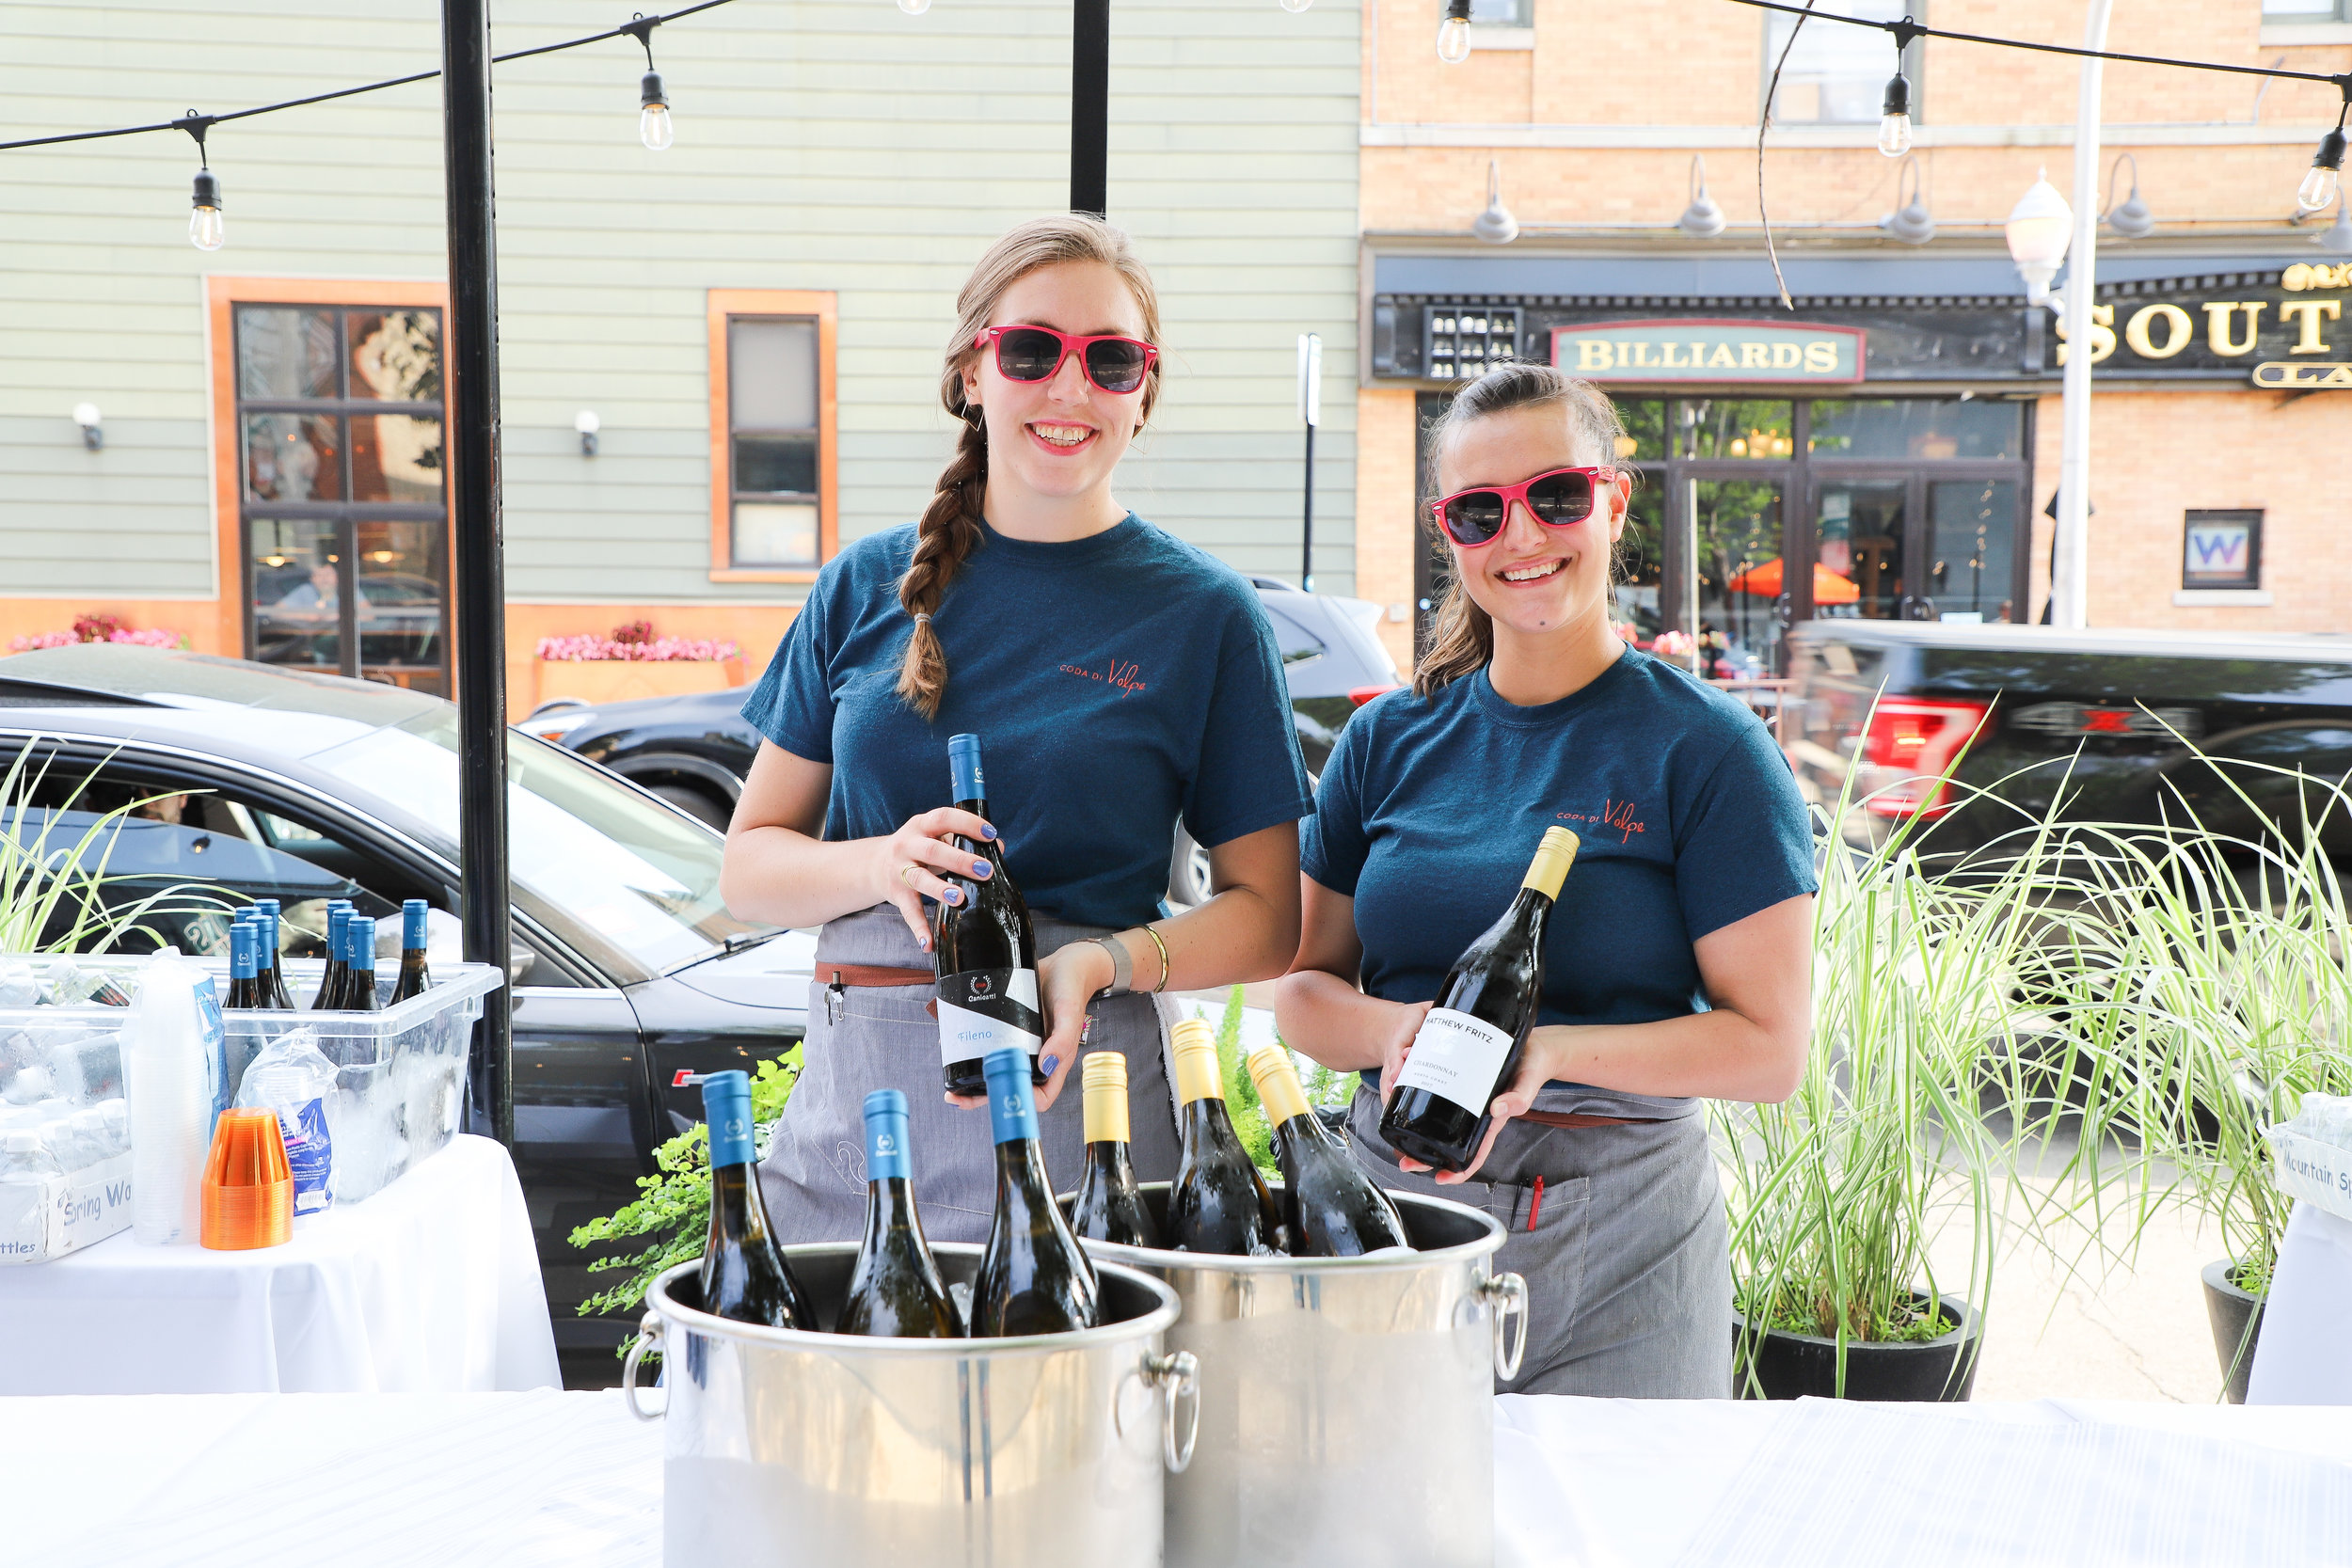 Servers showcase bottles of wine at a Coda di Volpe patio party.